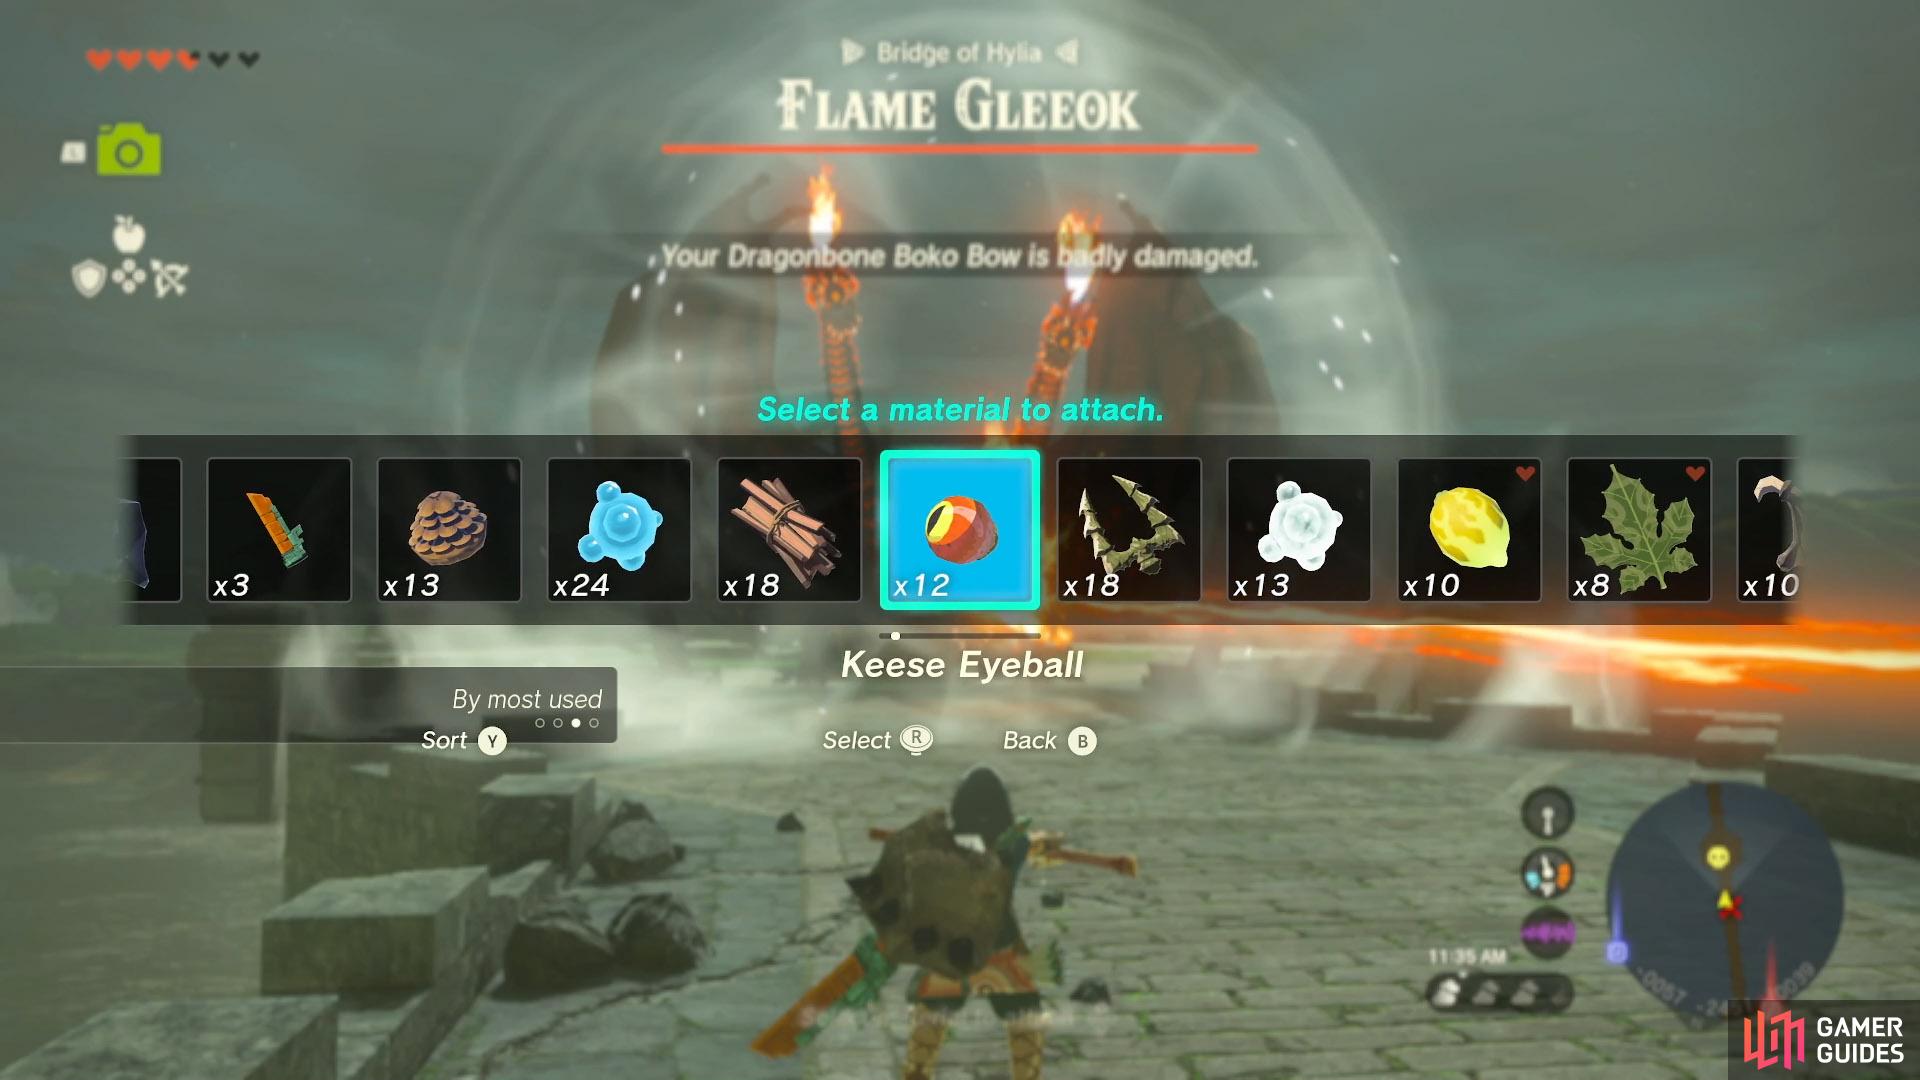 Taking advantage of the homing !Keese Eyeball arrows to hit the !Flame Gleeok eyes